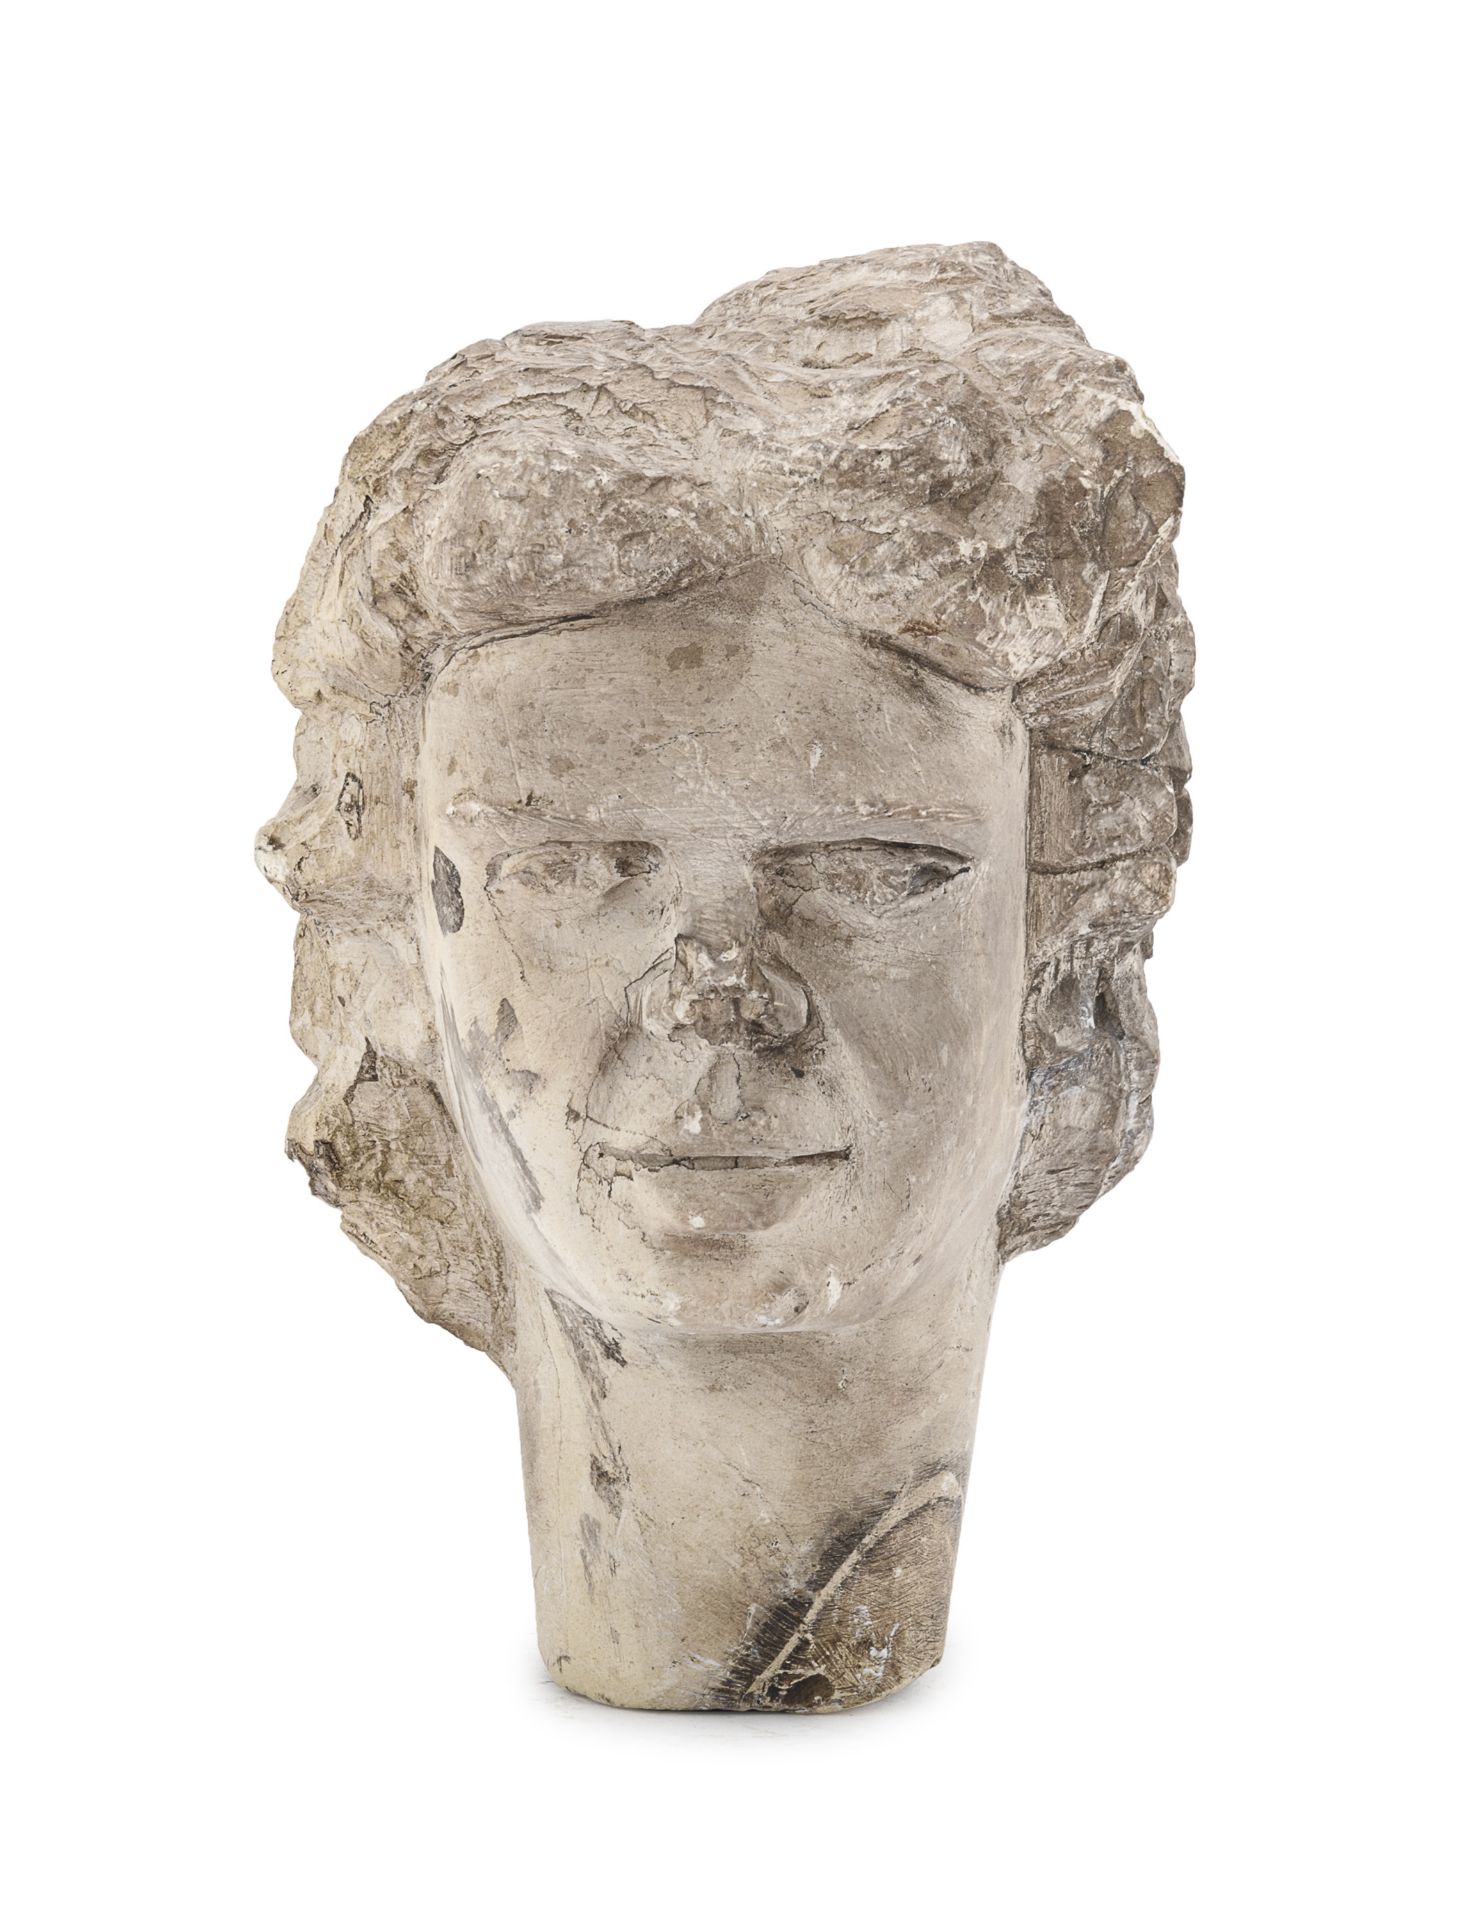 DOUBLE-FACED HEAD IN WHITE MARBLE EARLY 20TH CENTURY - Image 3 of 3